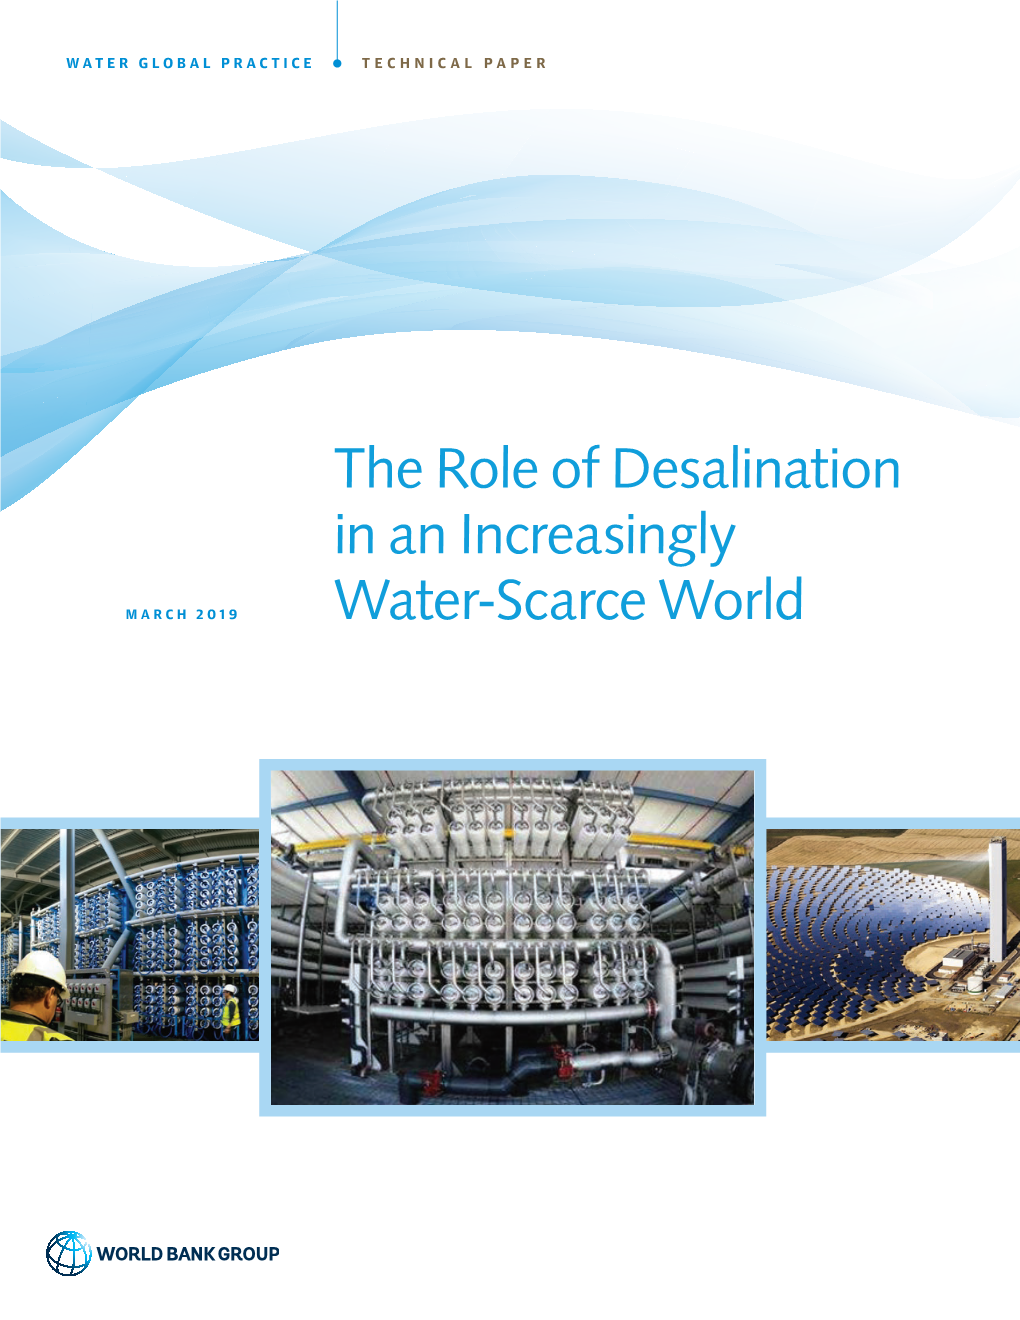 The Role of Desalination in an Increasingly Water-Scarce World About the Water Global Practice